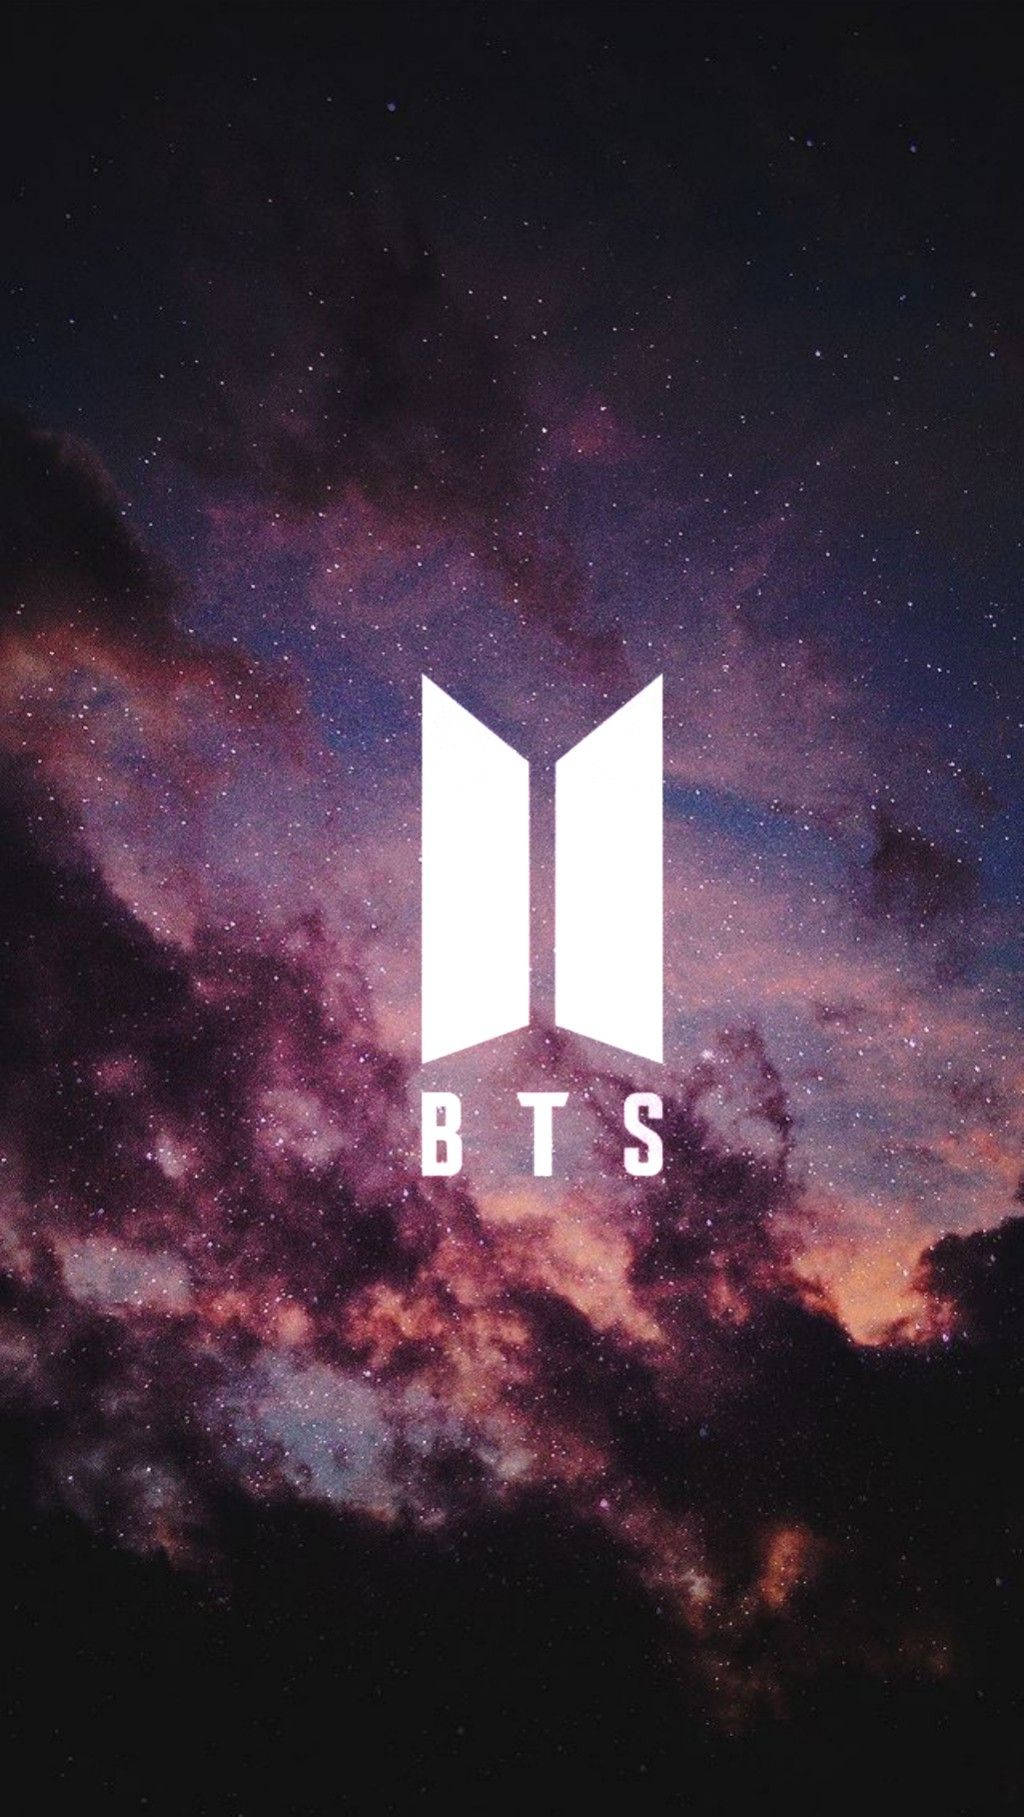 Bts Logo At Night Picture